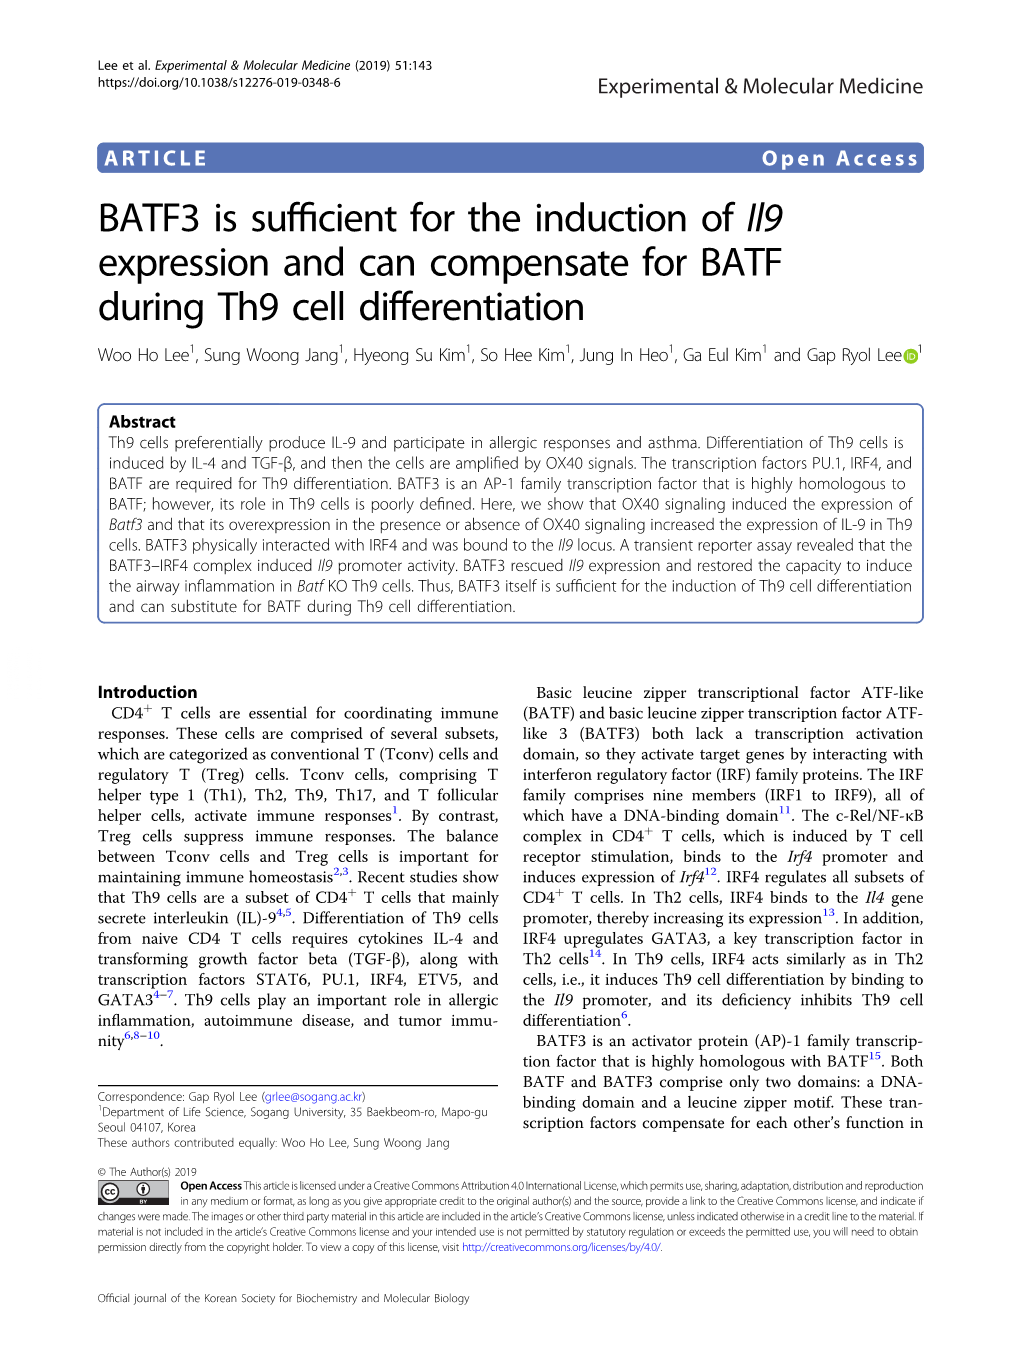 BATF3 Is Sufficient for the Induction of Il9 Expression and Can Compensate